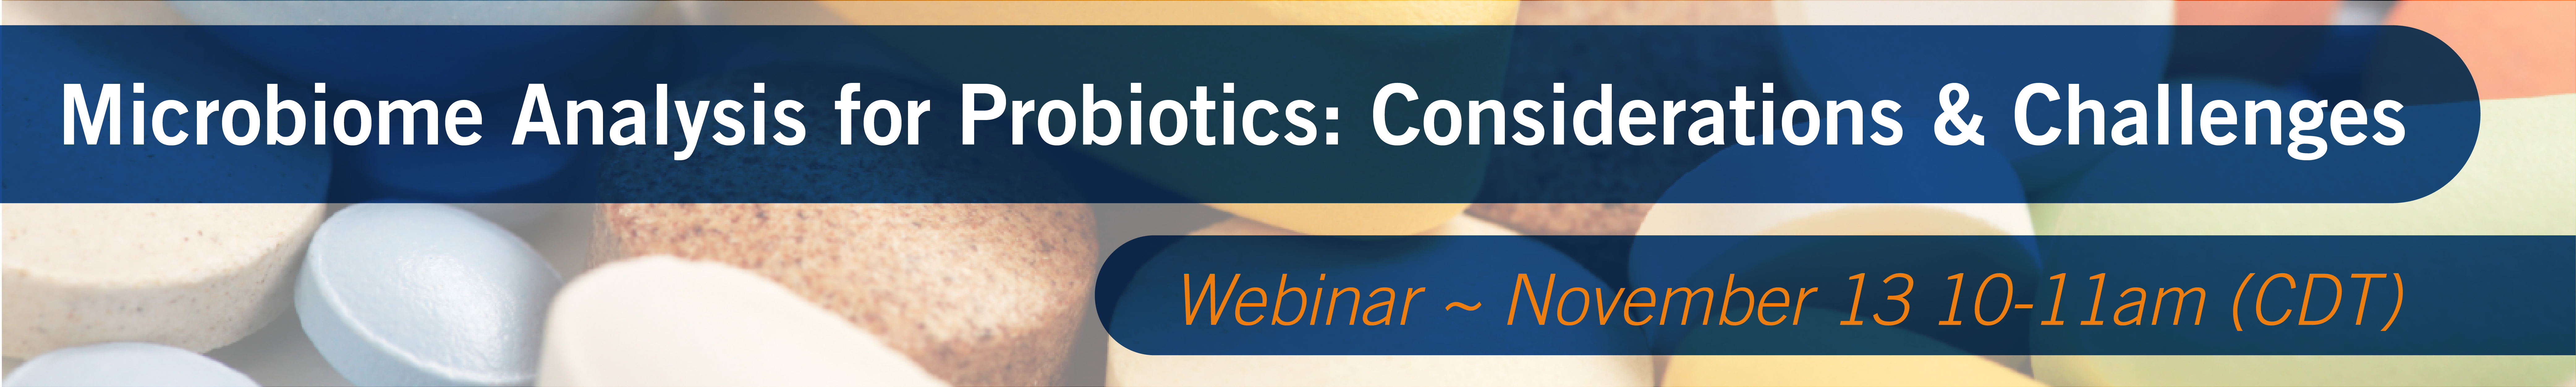 Microbiome Analysis for Probiotics: Considerations & Challenges 